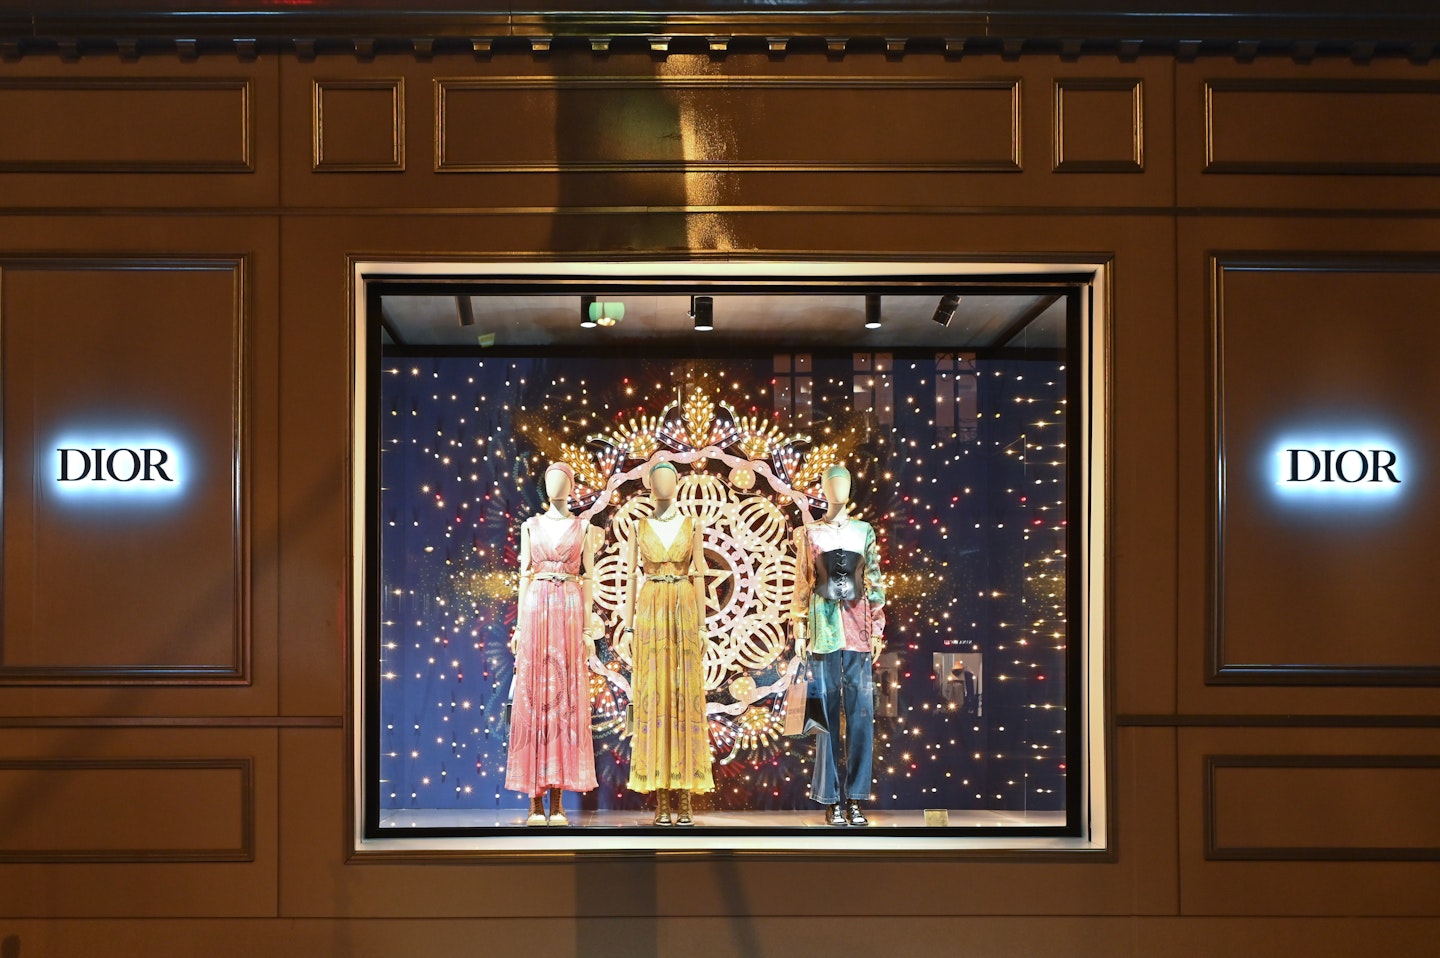 2020: Best Christmas Window Displays From Around The World